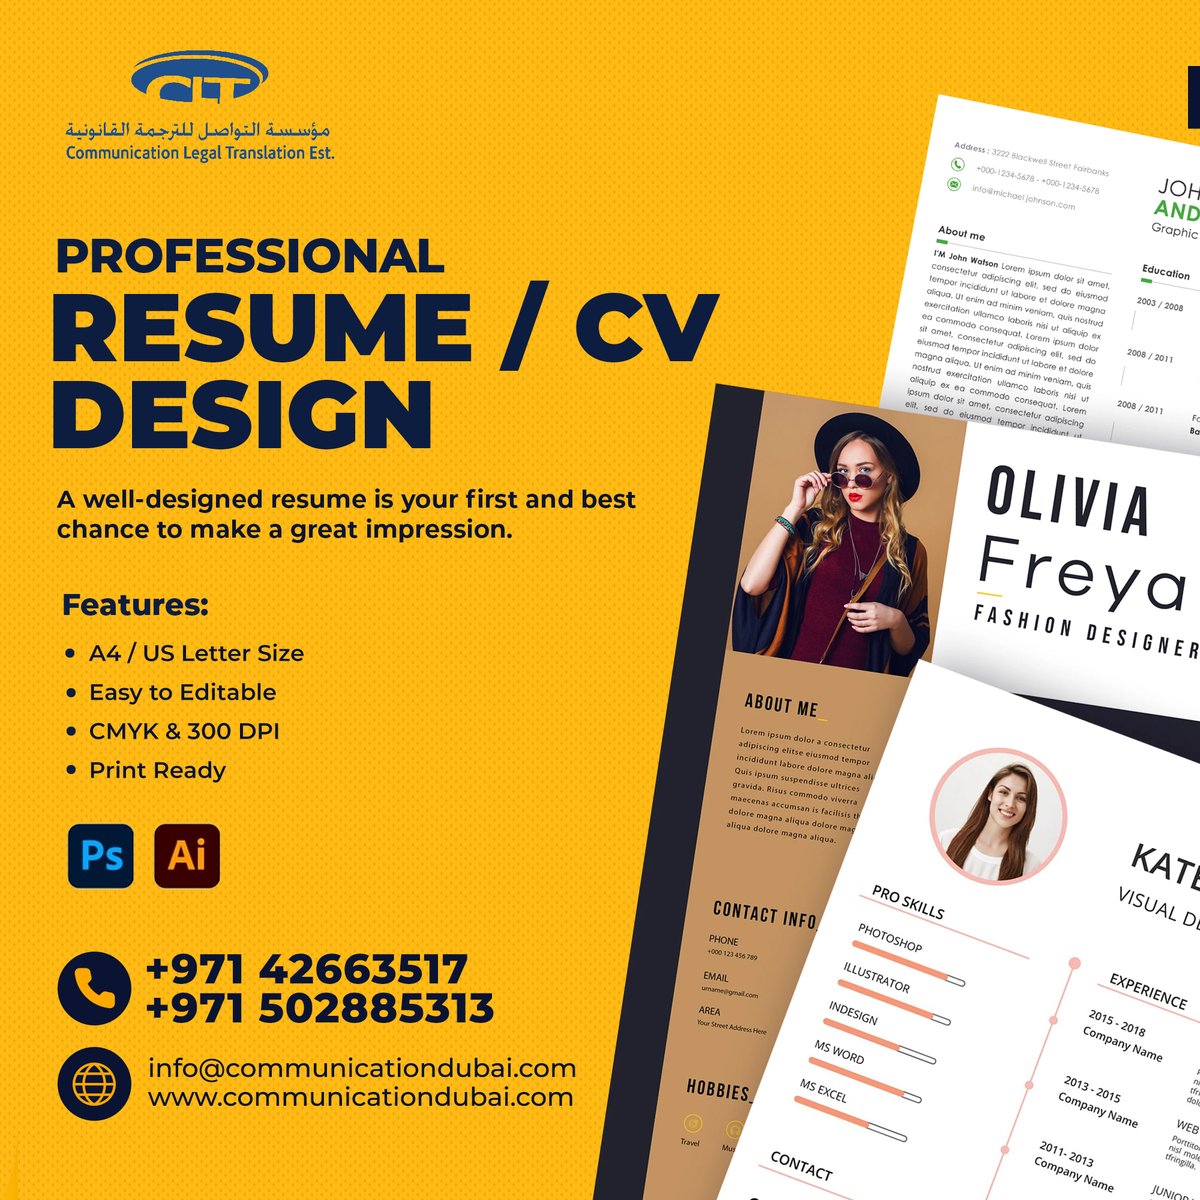 'PROFESSIONAL RESUME / CV DESIGN SERVICES

Features:
A4 / US Letter Size
Easy to Editable
CMYK & 300 DPI
Print Ready 

For More Information:
==========
📞 +971 42663517, +971 502885313
📧 info@communicationdubai.com
🌐 communicationdubai.com

#ResumeDesignServices